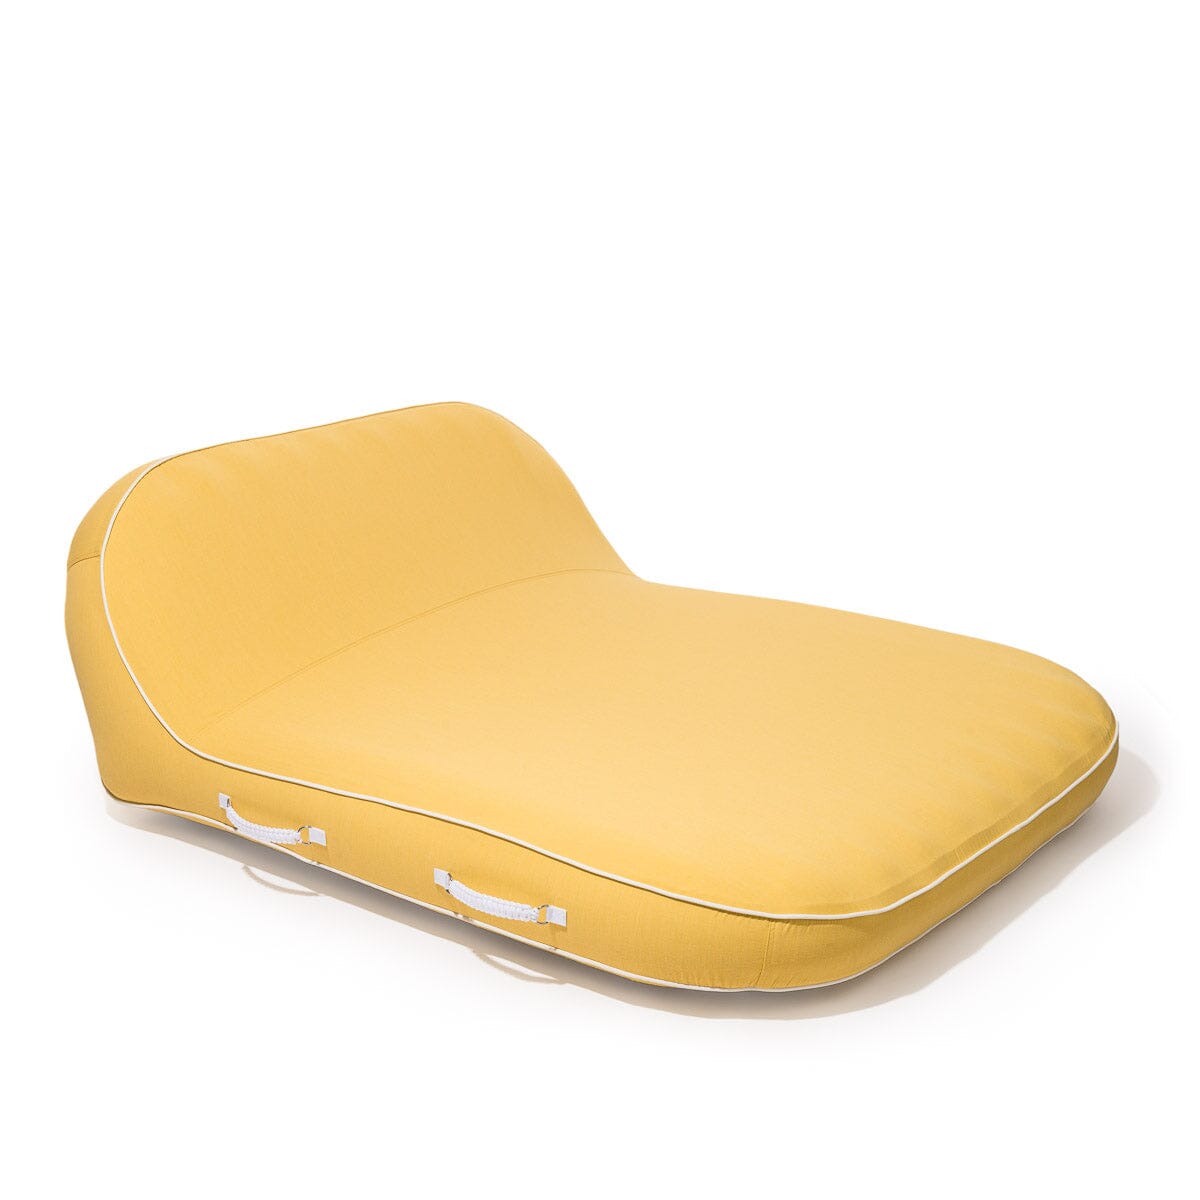 The XL Pool Lounger - Rivie Mimosa Pool Lounger Business & Pleasure Co Aus 